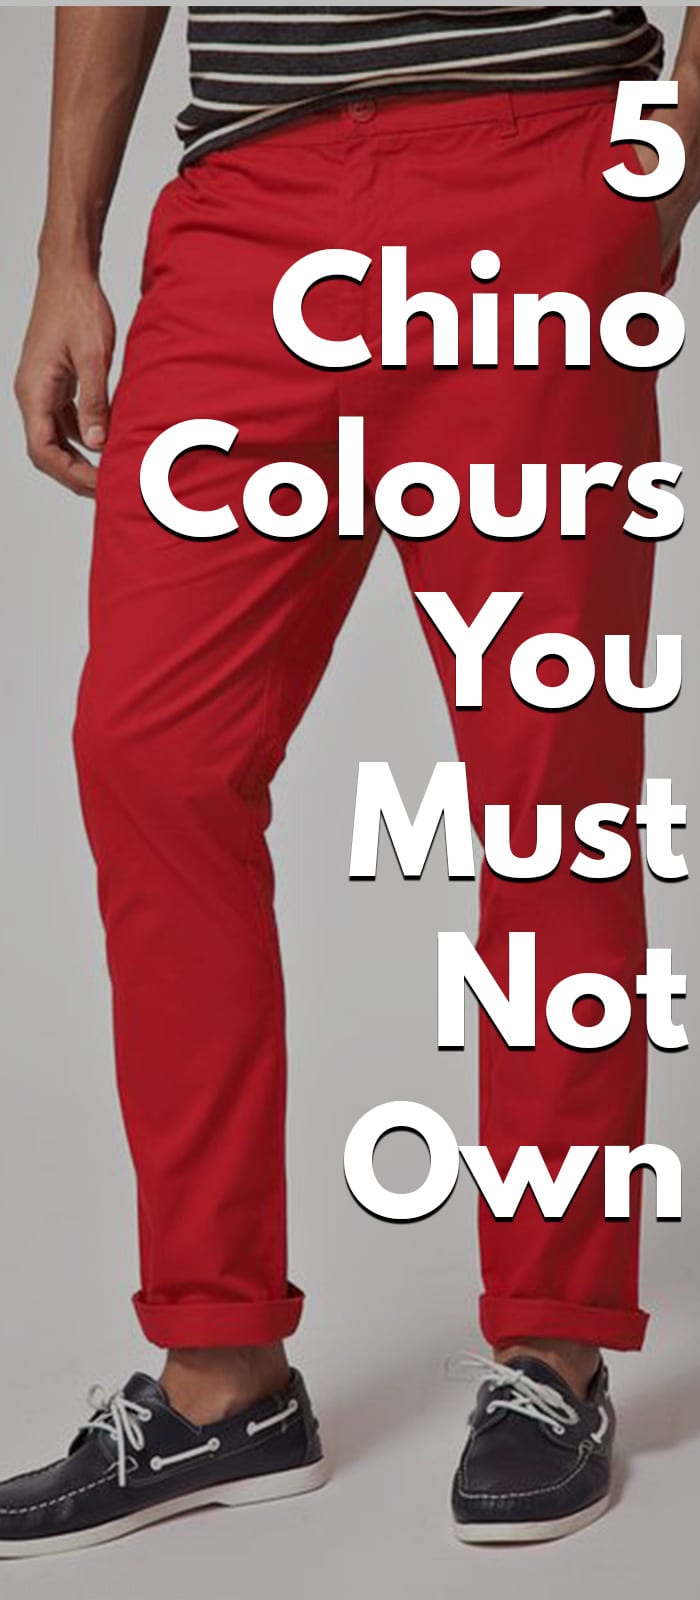 5 Chino Colours You Must Not Own